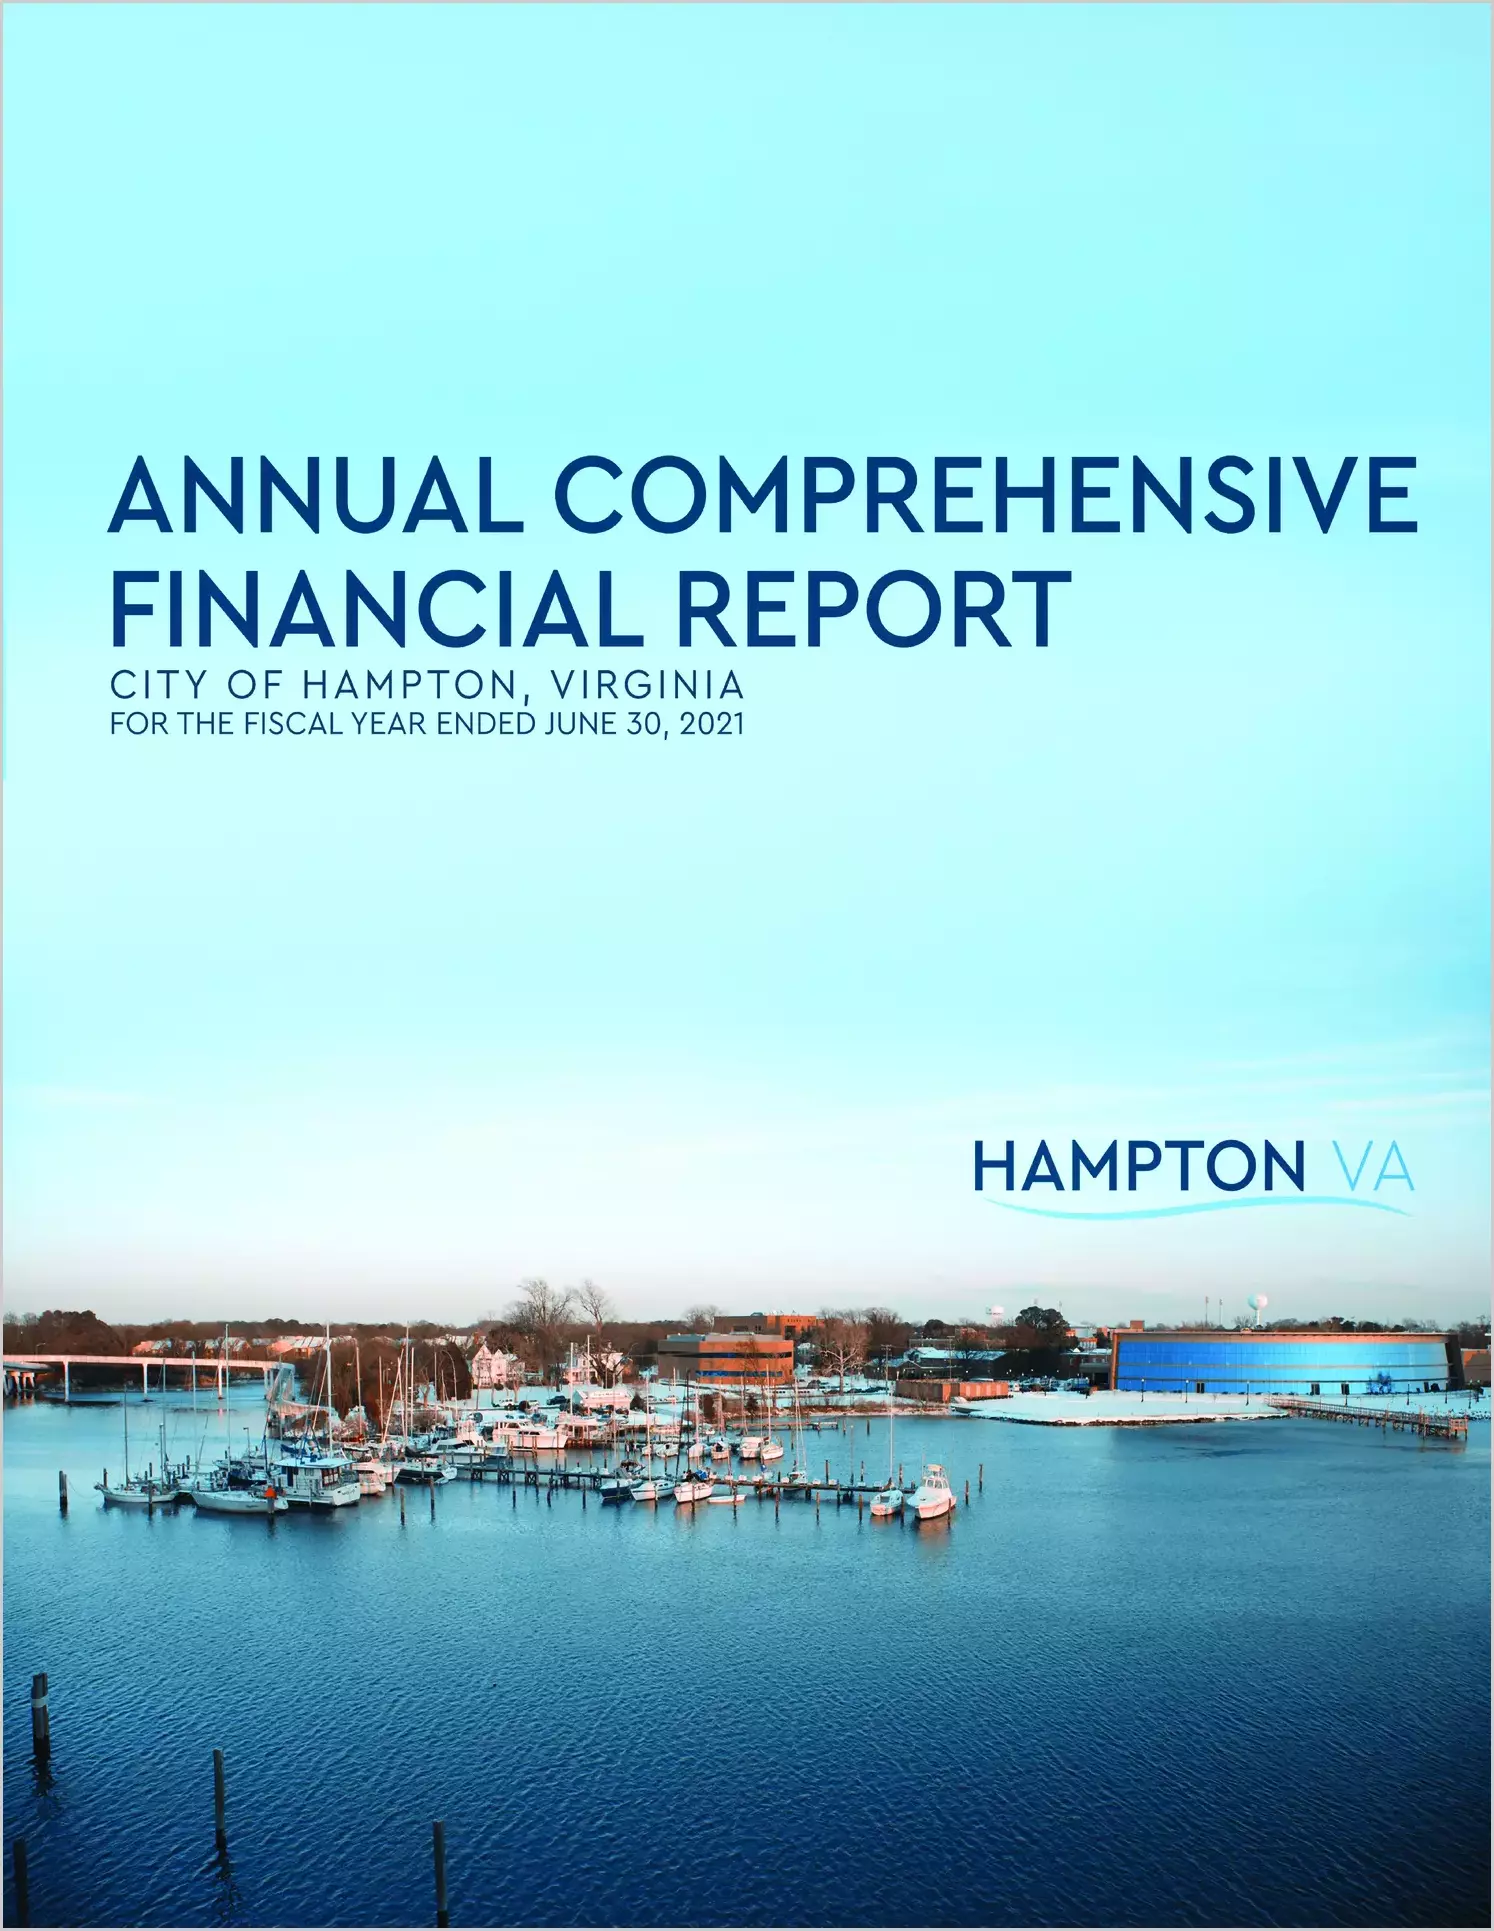 2021 Annual Financial Report for City of Hampton